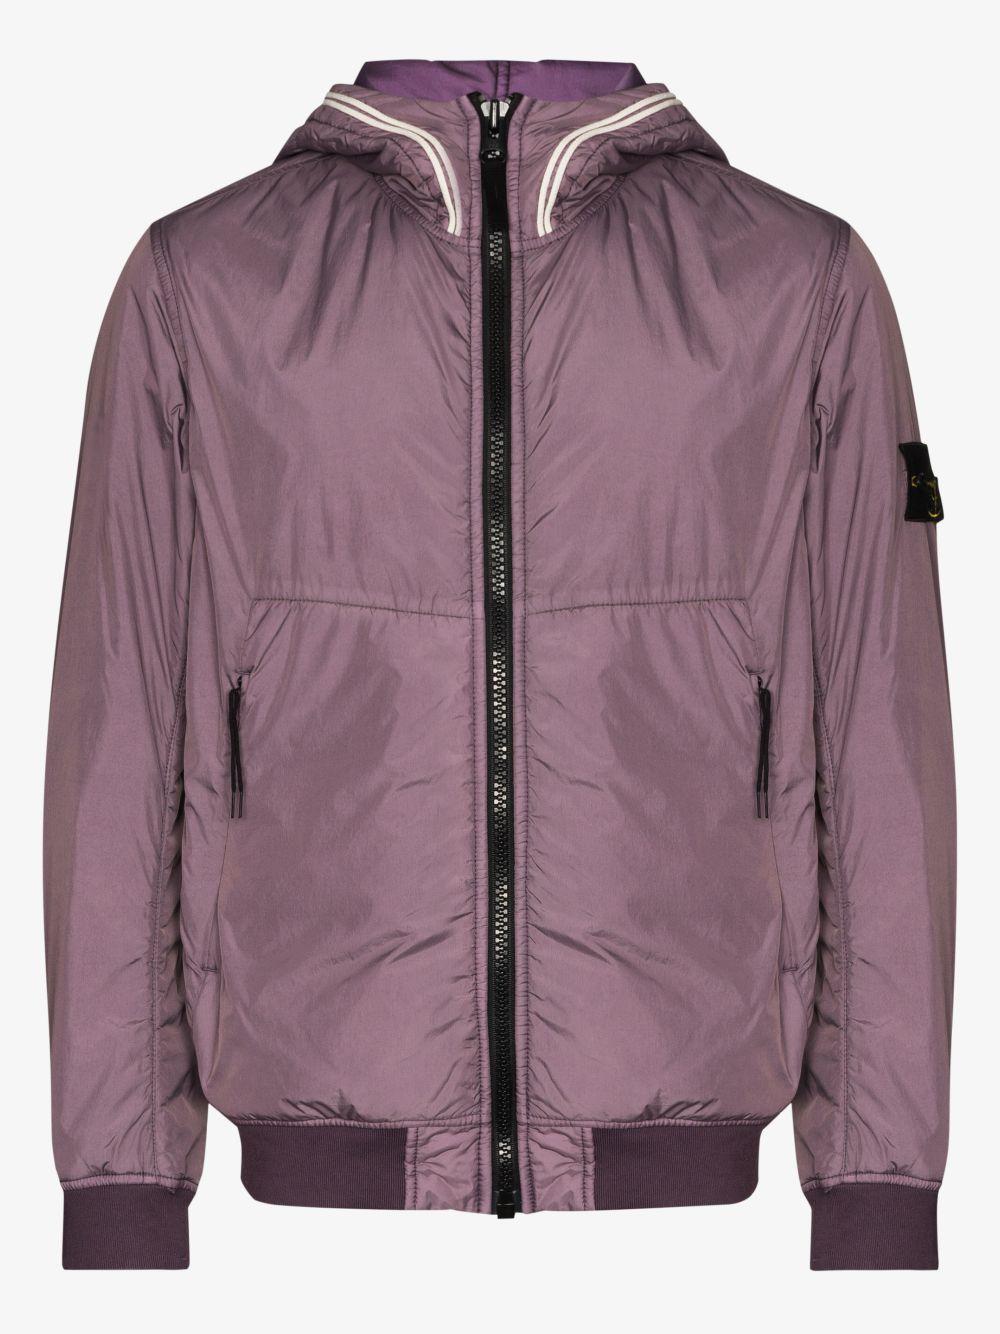 Stone Island Synthetic Padded Hooded Jacket in Purple for Men - Lyst